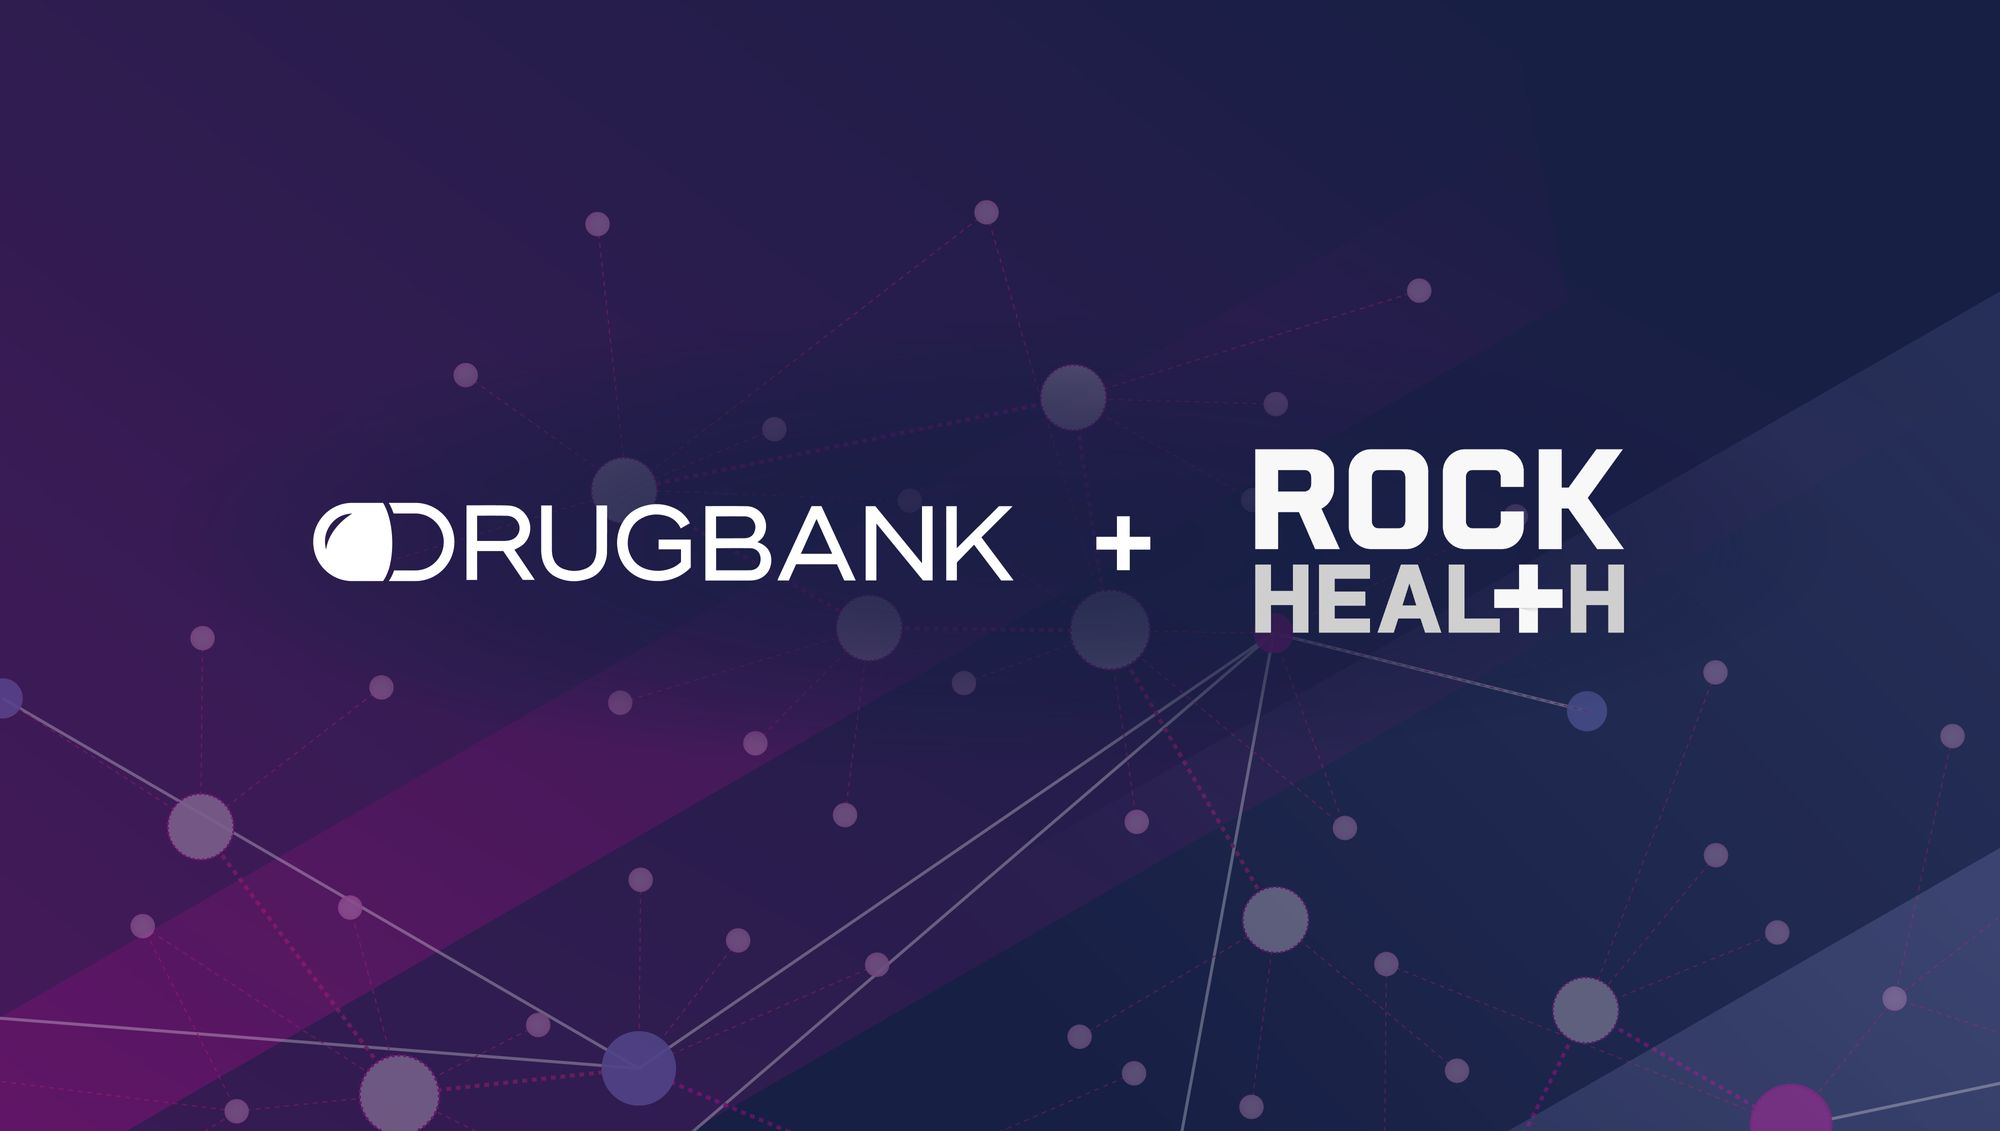 DrugBank’s Four Big Takeaways from the 2021 Rock Health Summit